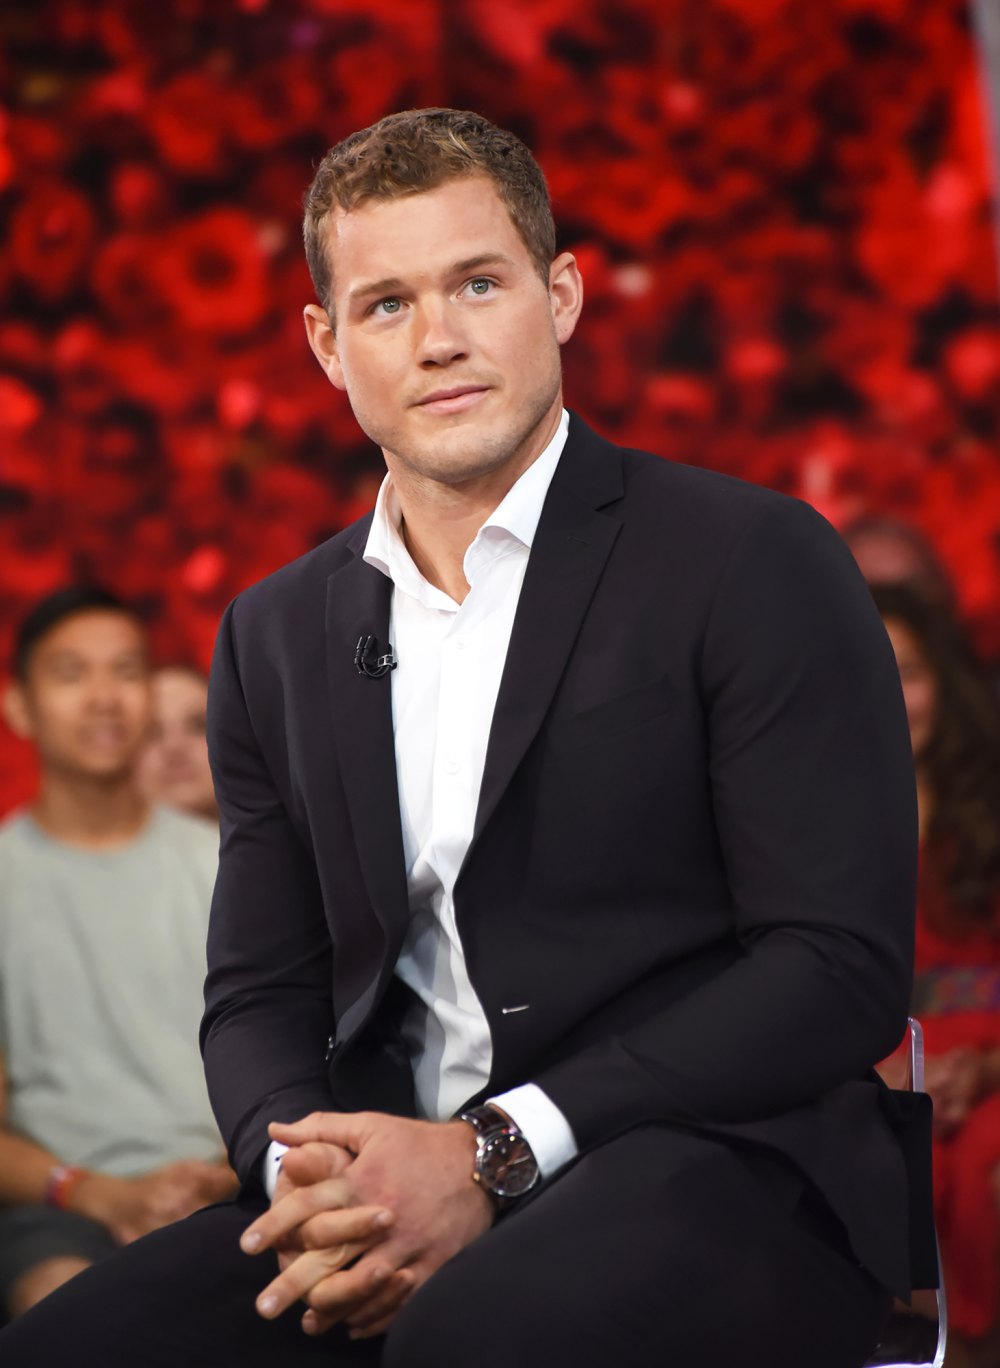 Colton Underwood Deletes All But One Tweet Ahead of 'Bachelor' Premiere